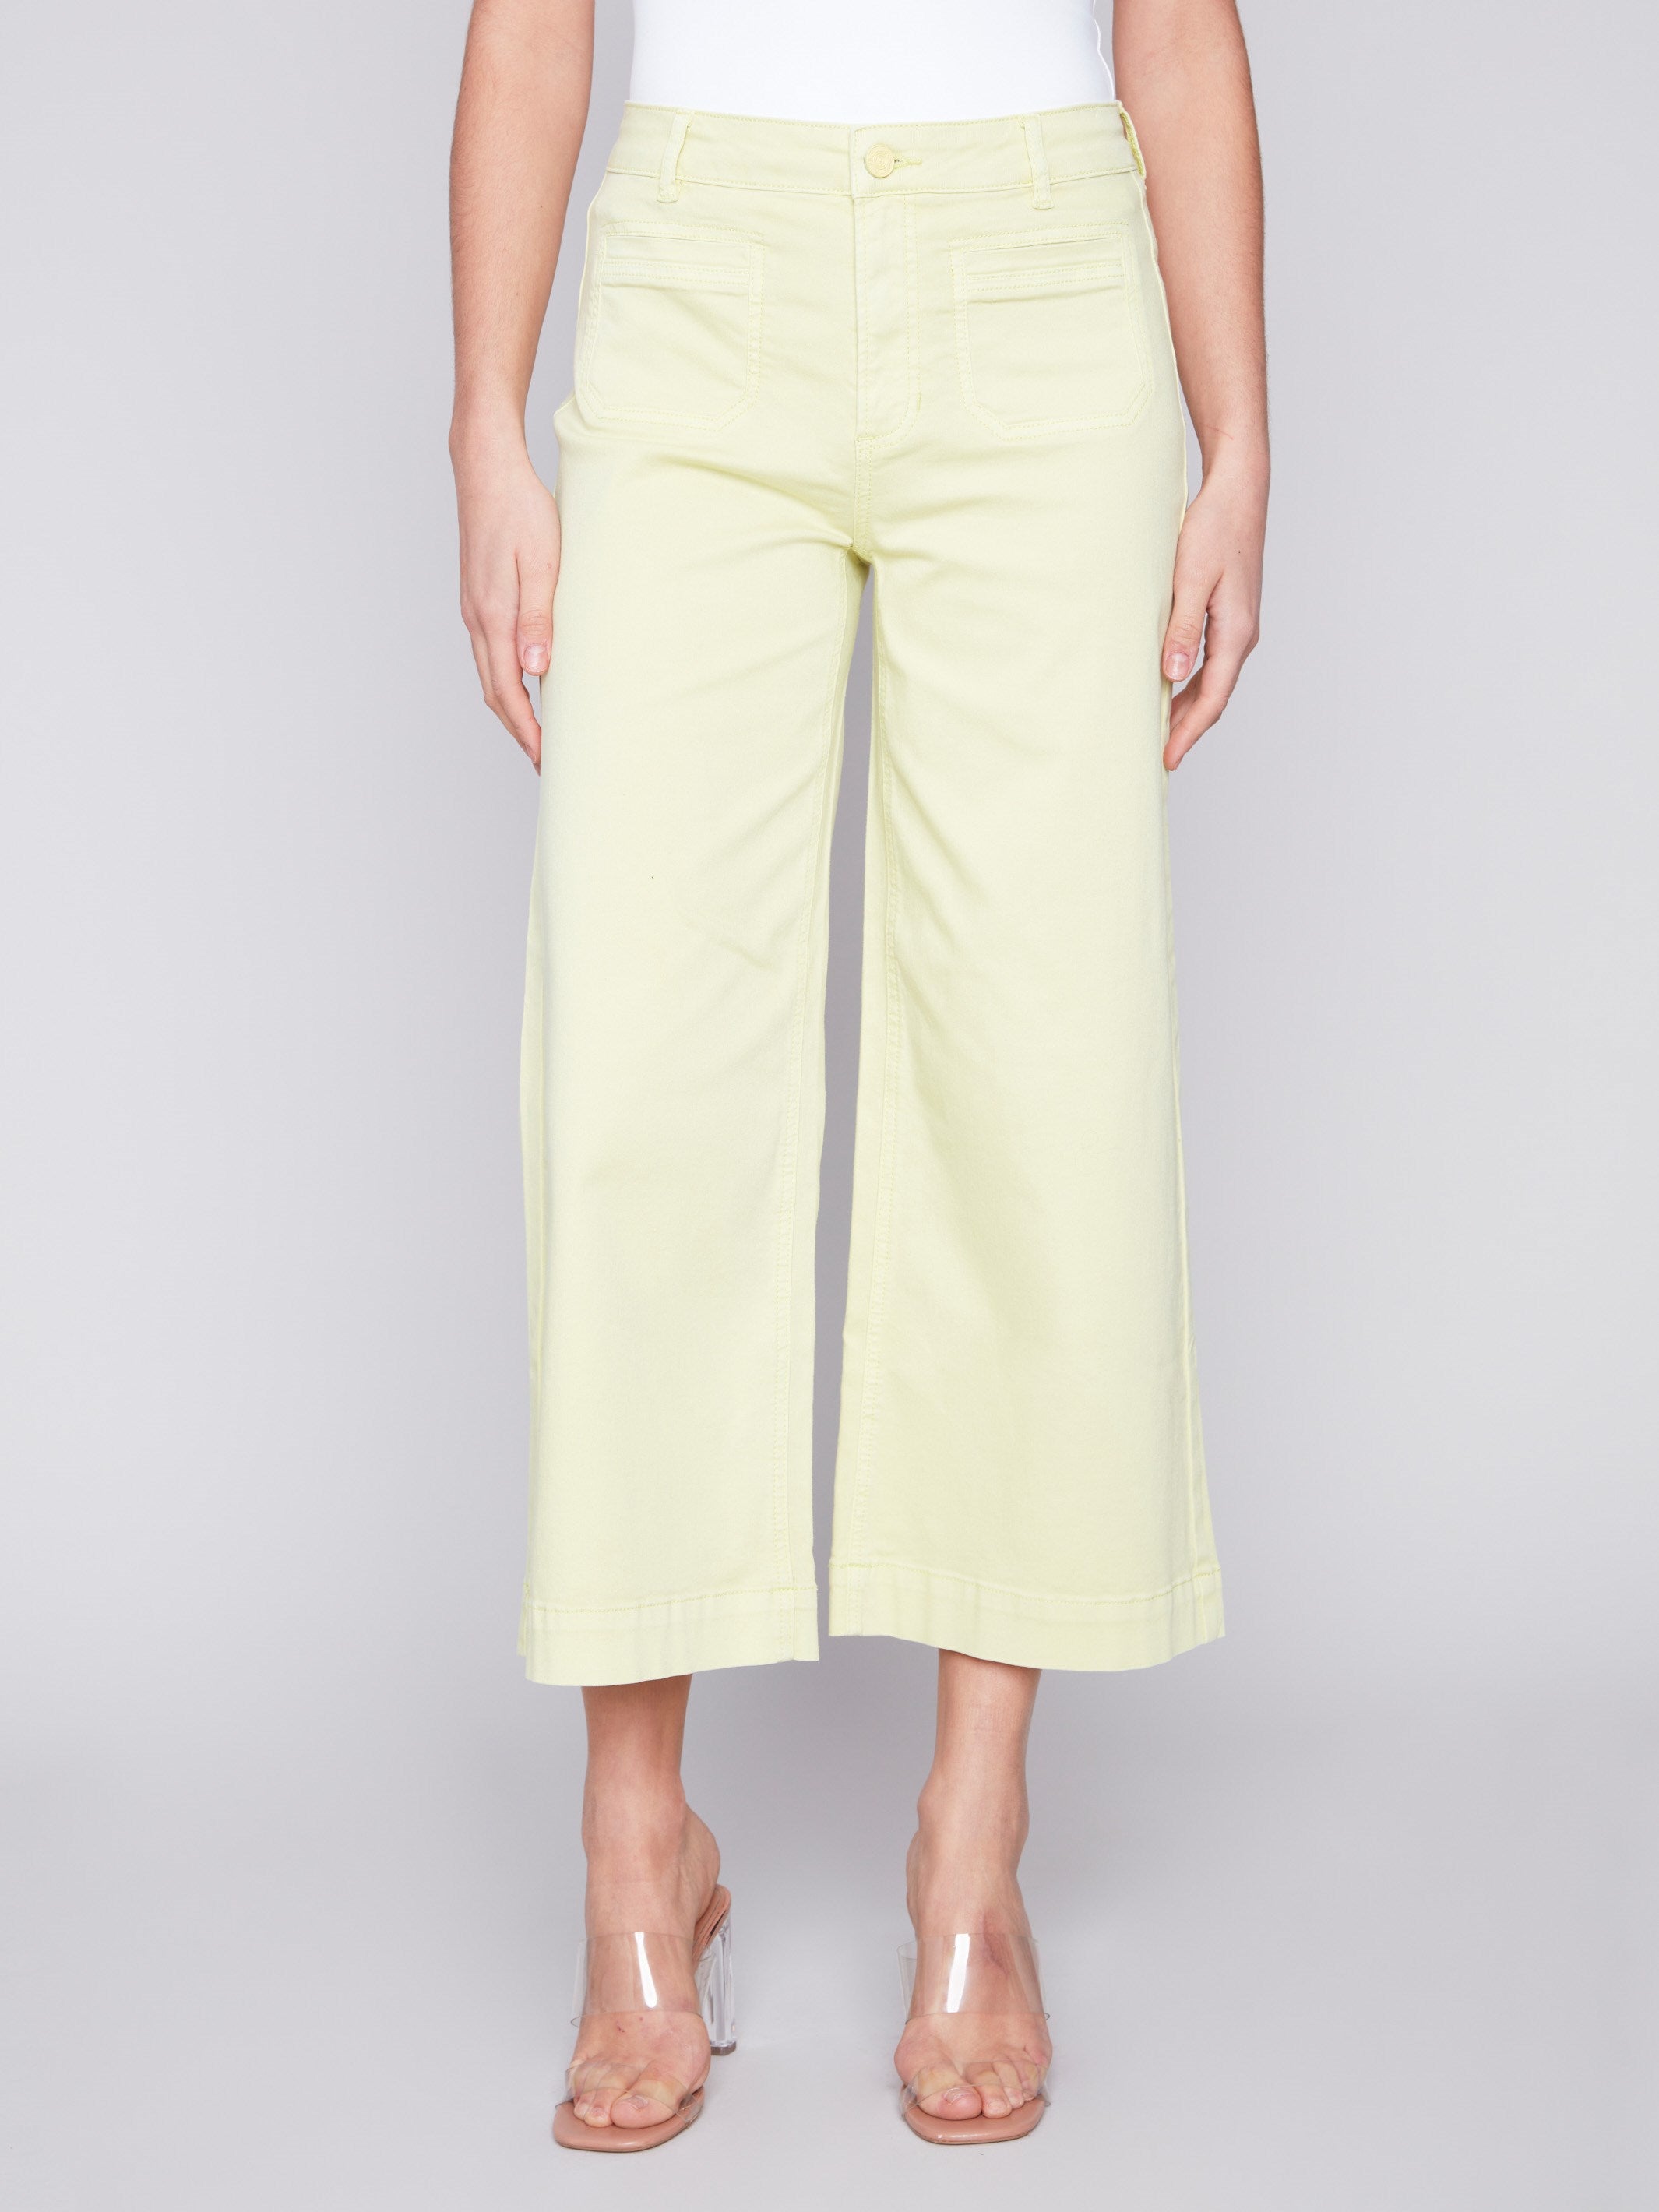 Cropped Wide Leg Twill Pants - Anise - Charlie B Collection Canada - Image 2